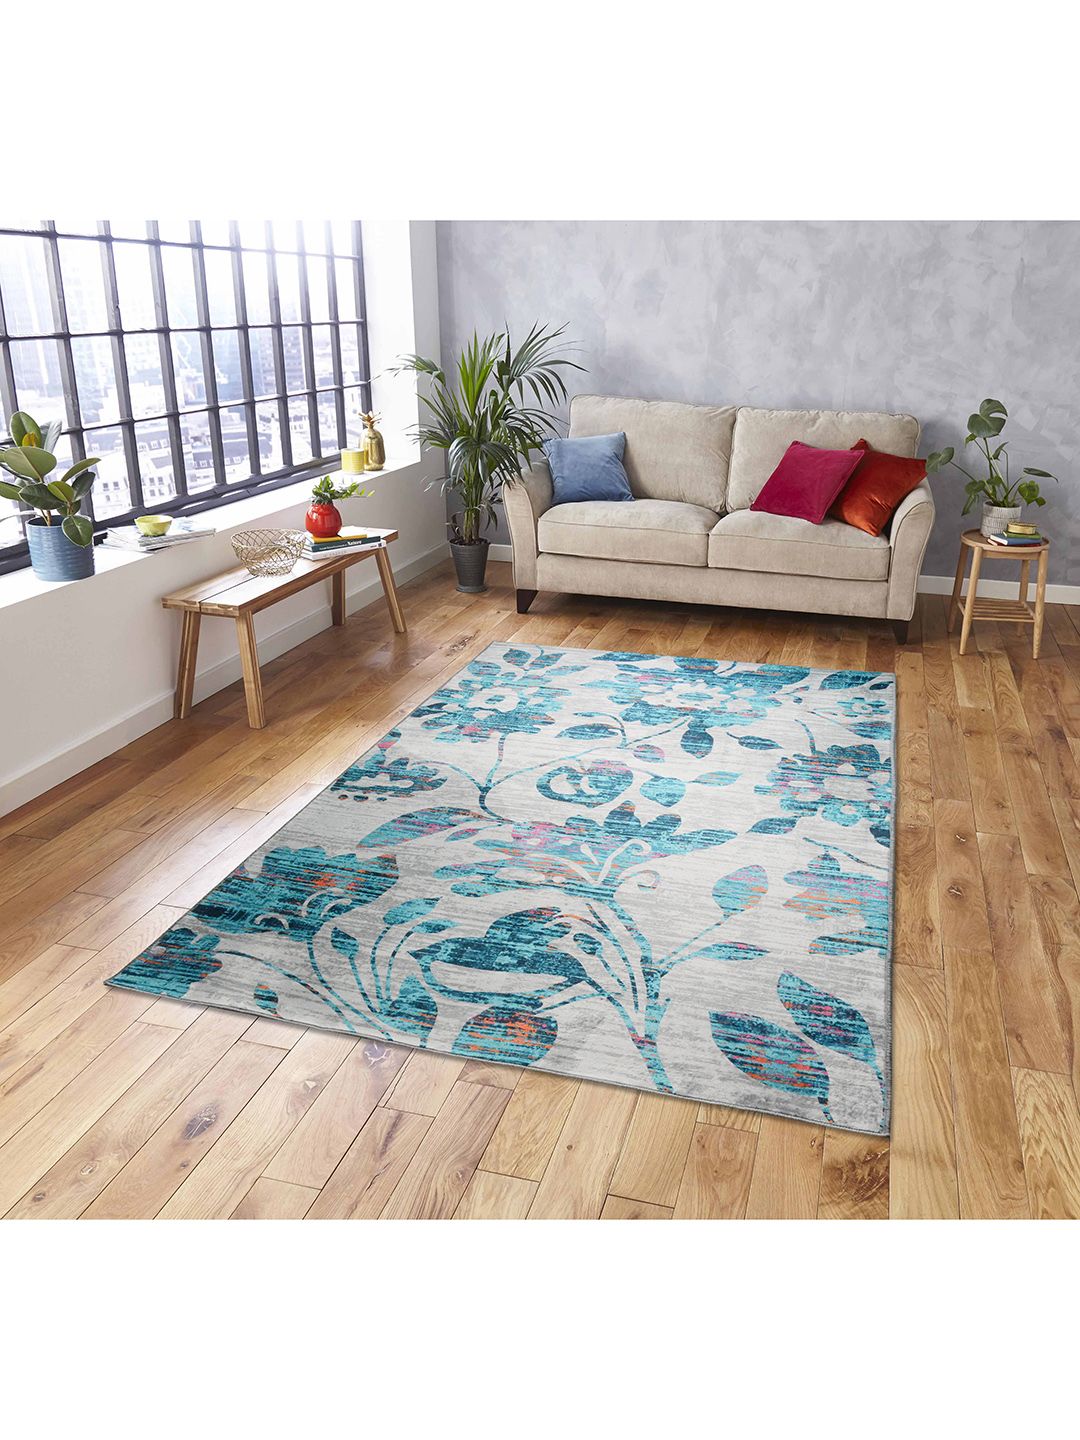 Athome by Nilkamal  Grey & Blue Floral Printed Carpets Price in India